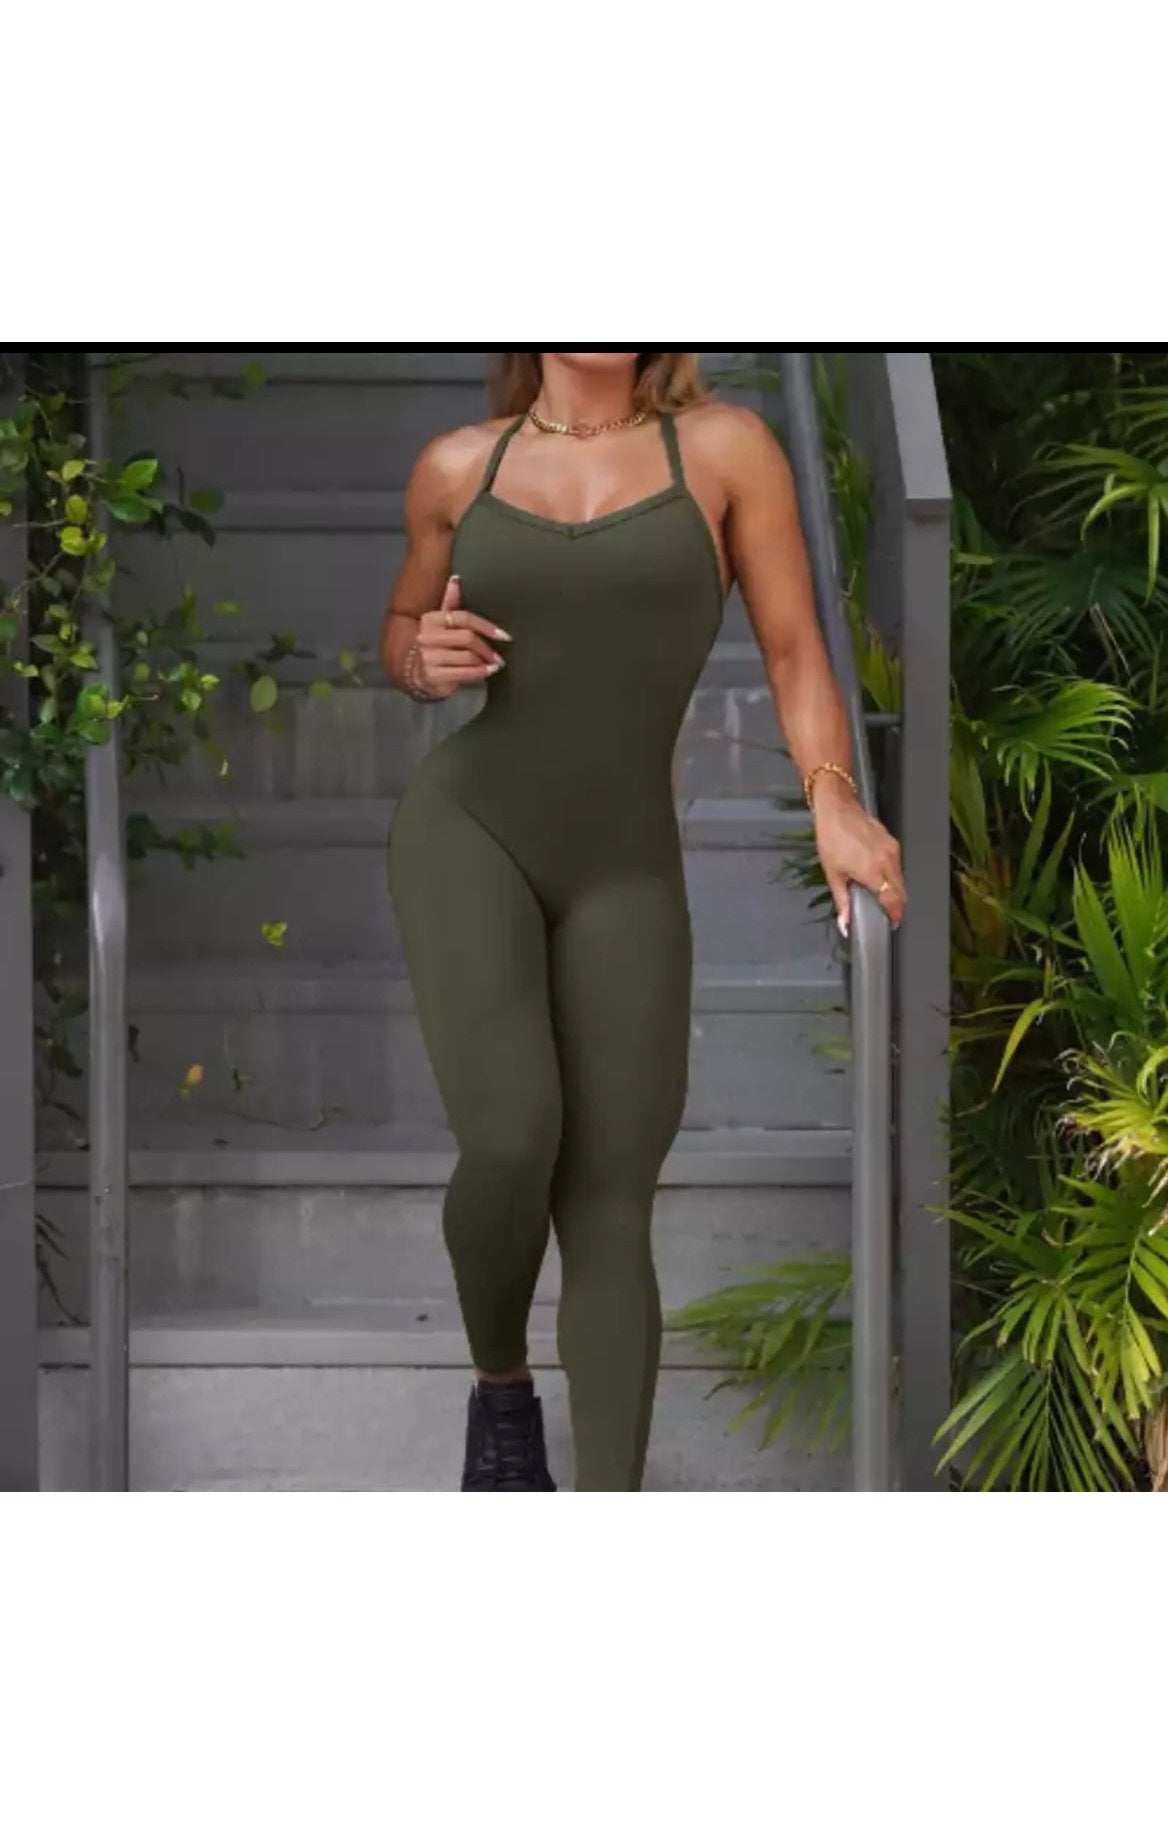 Yoga Gym Jumpsuit Strap  Sexy (Many Colors)